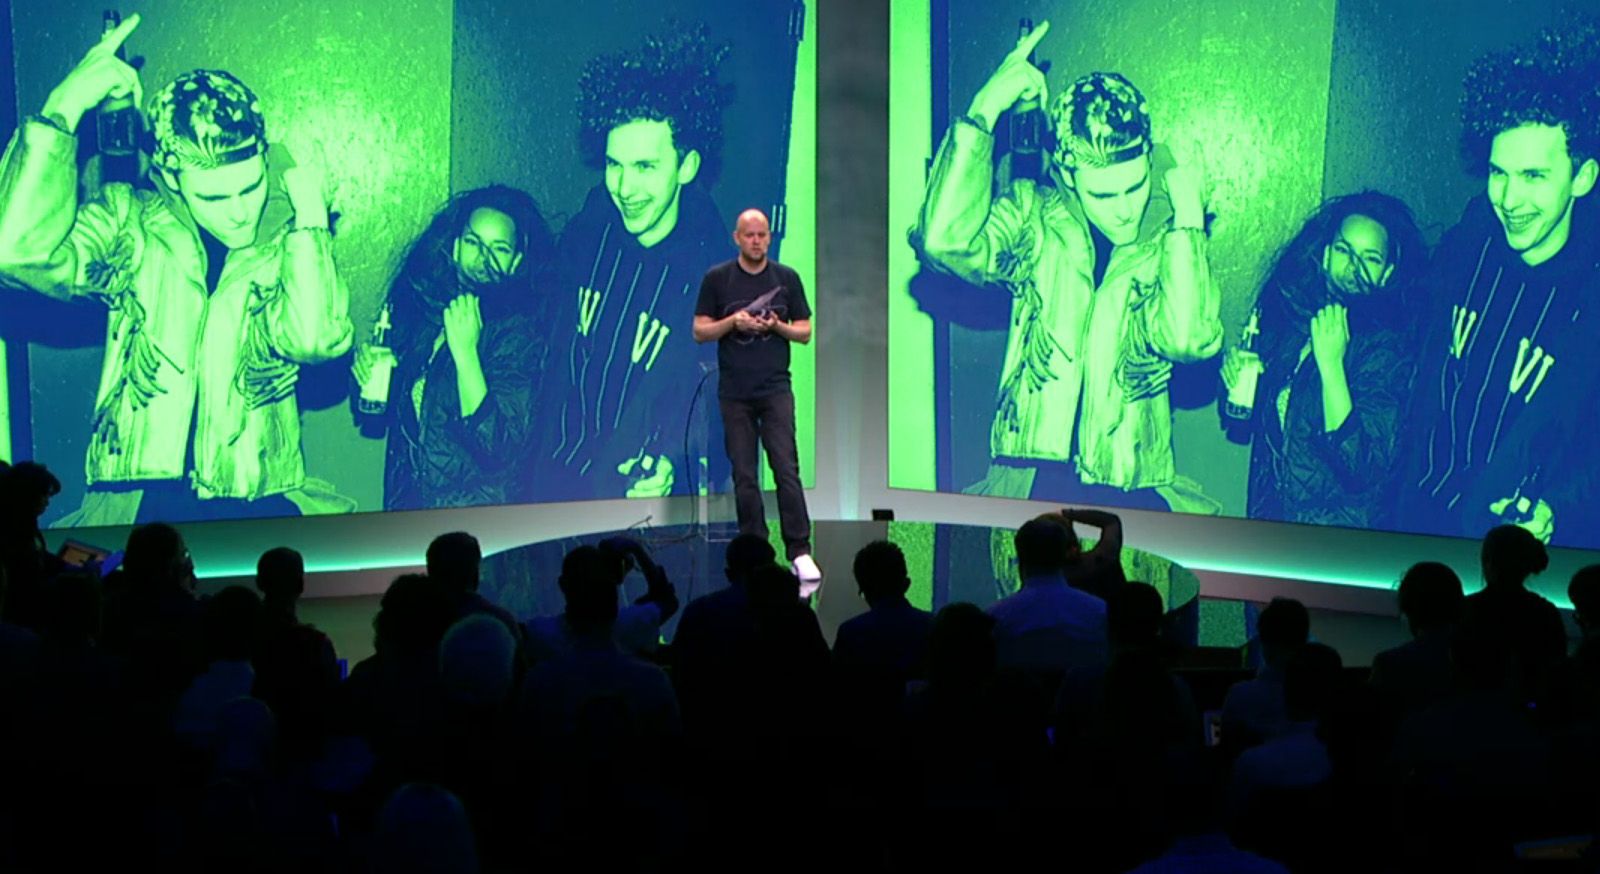 spotify adds video to be your all in one news feed and radio player on the way to work image 1